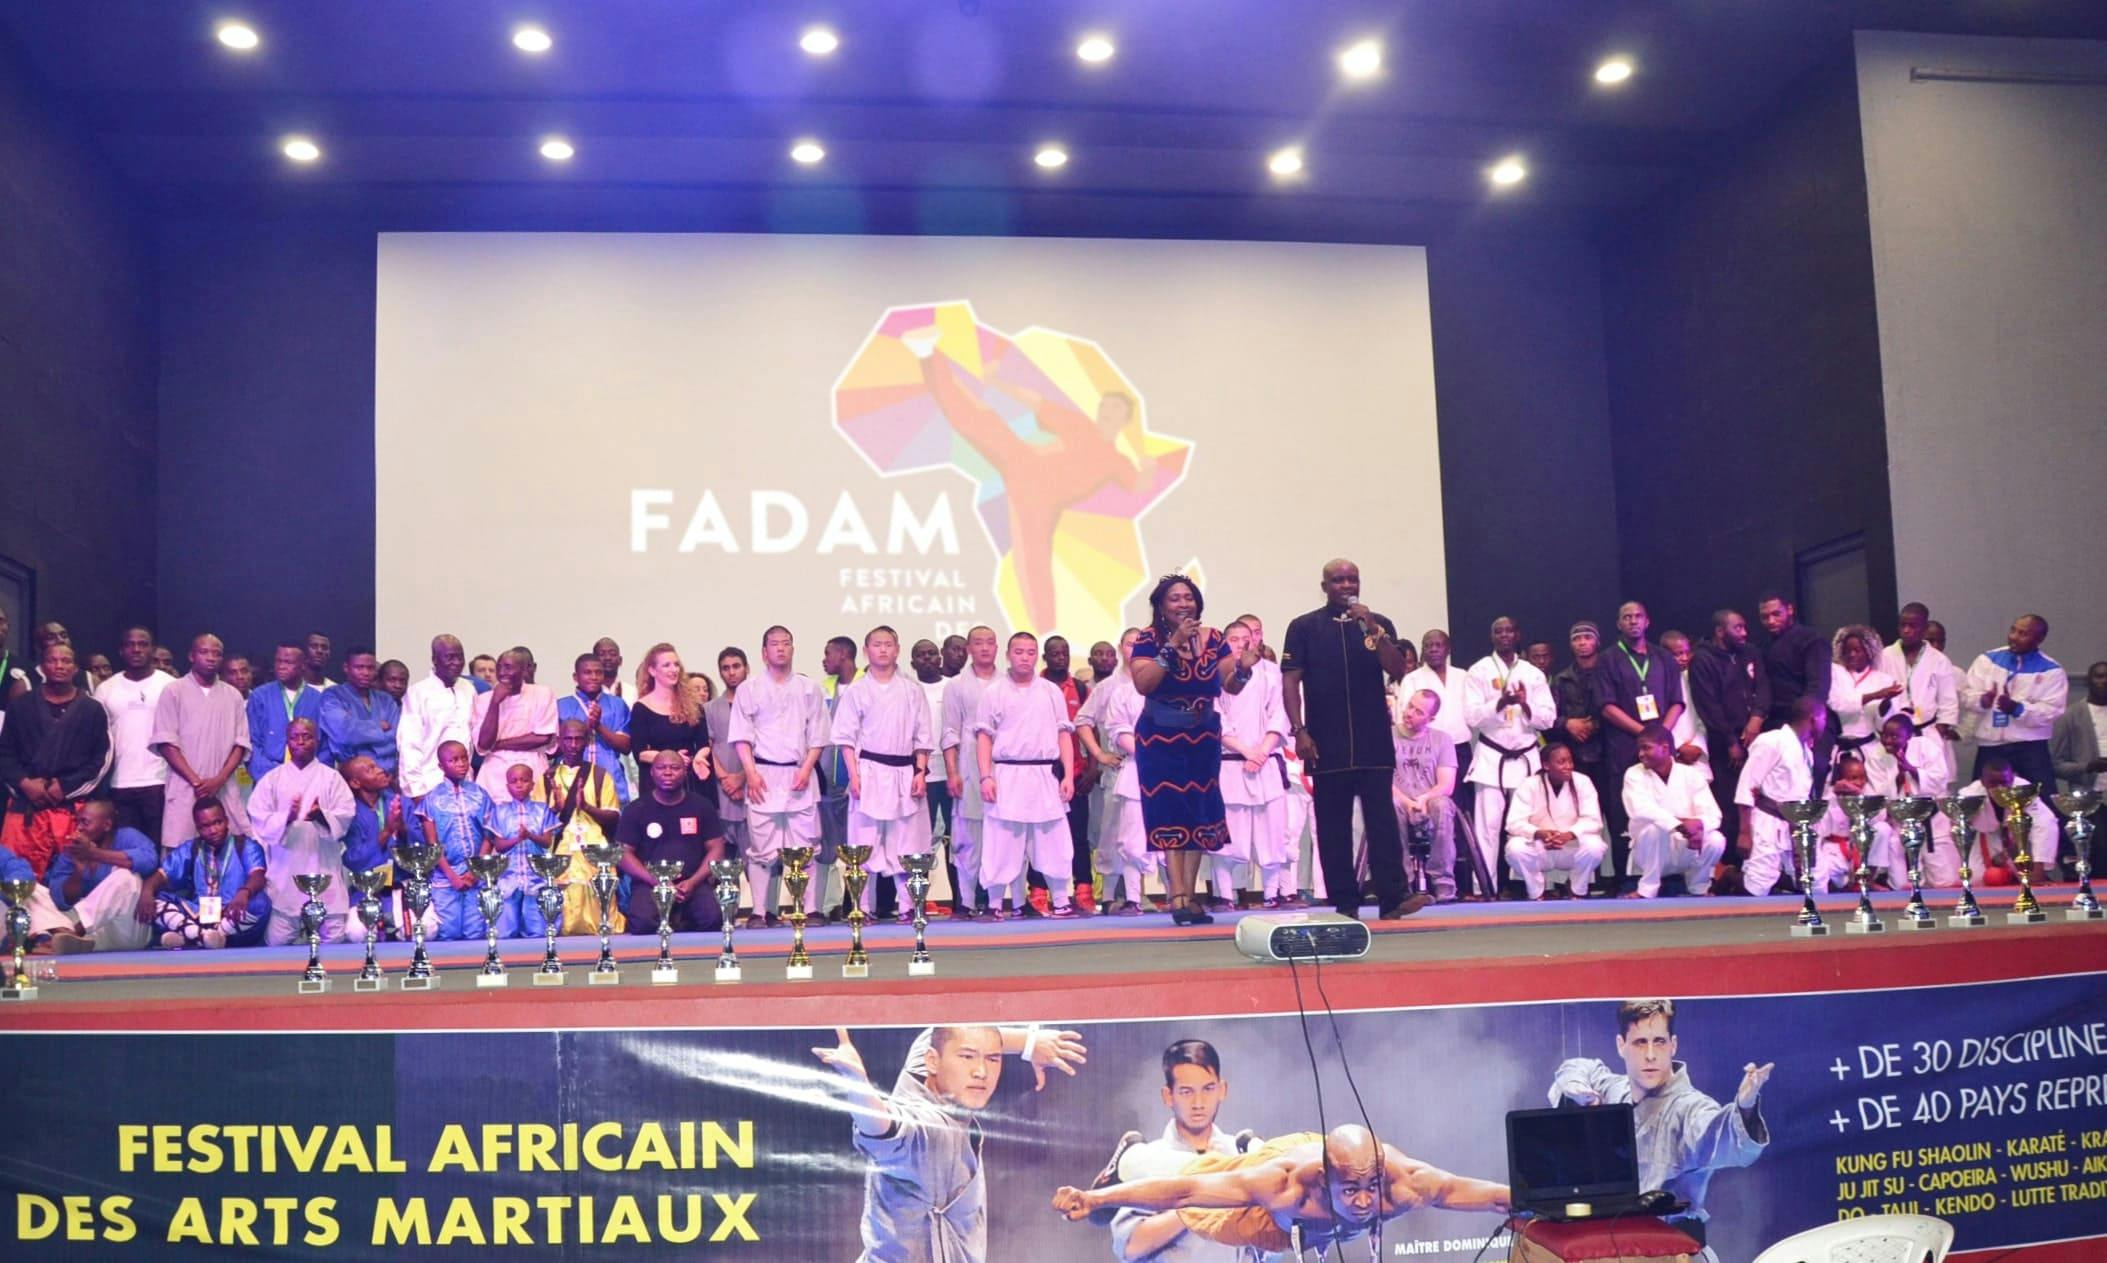 People on stage for a ceremony during FADAM 2018